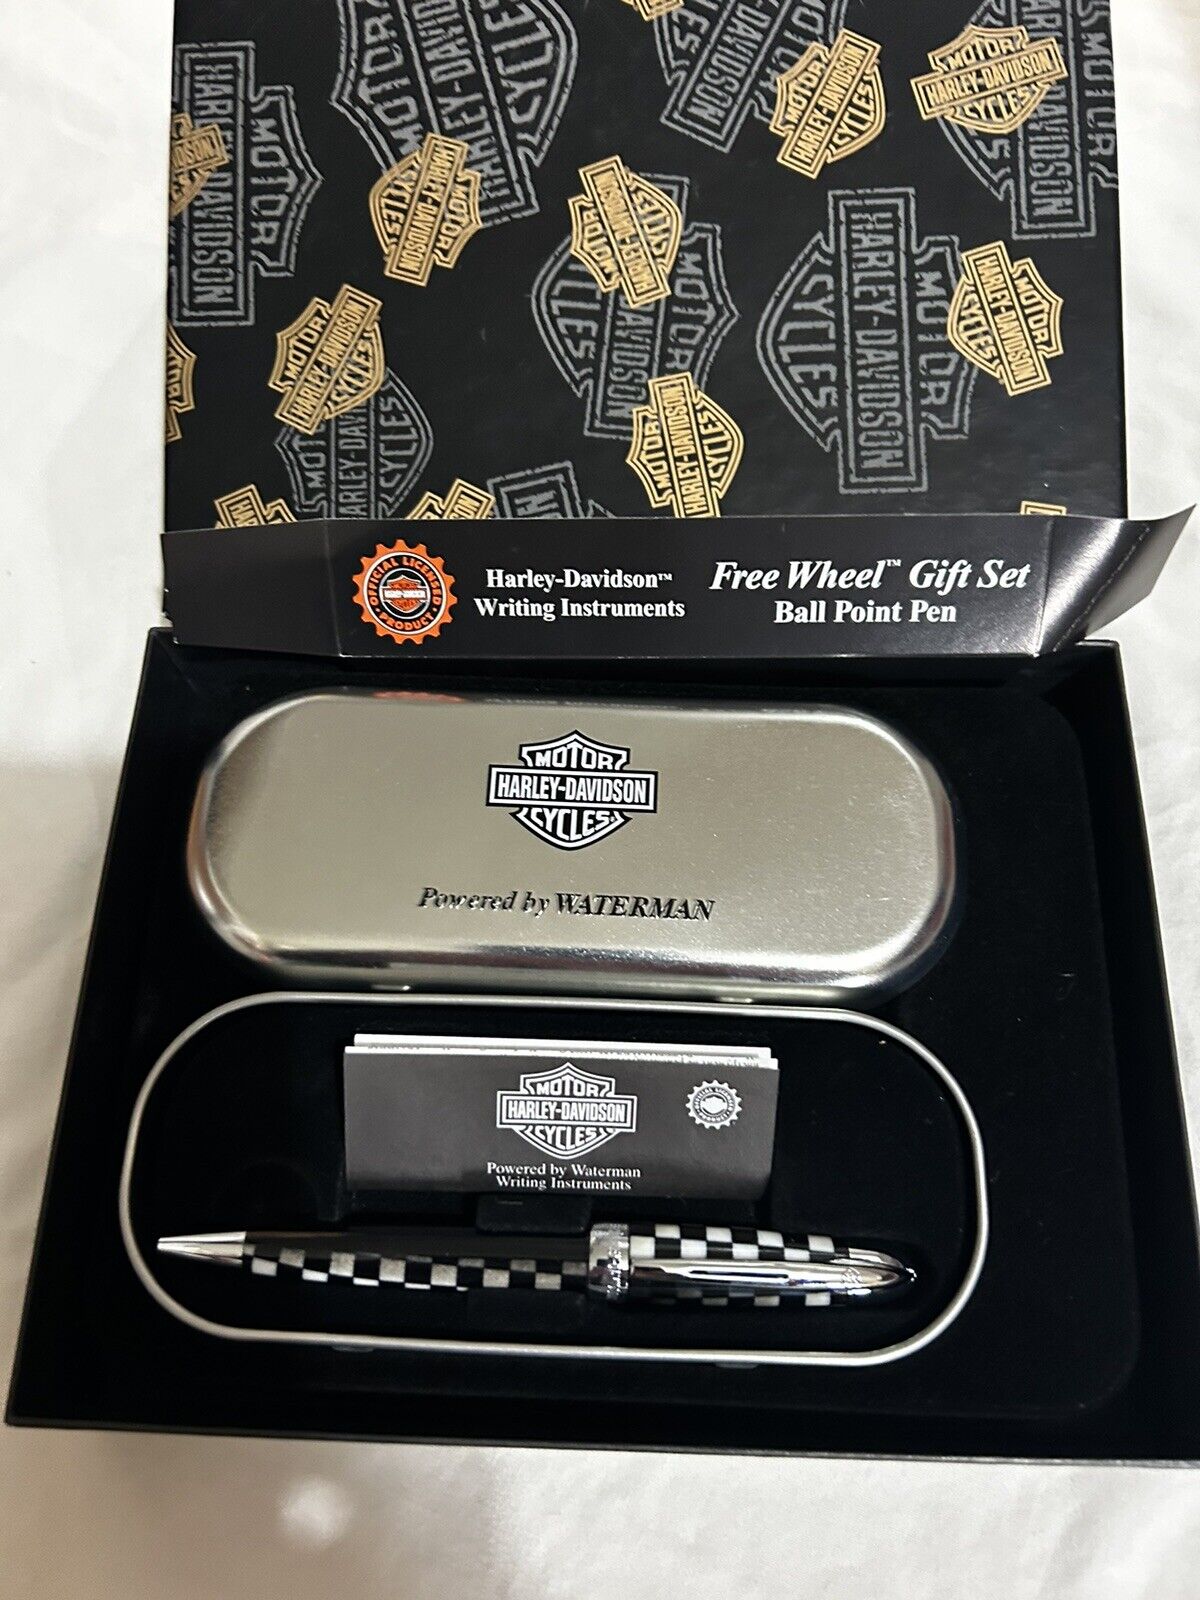 Harley-Davidson Free Wheel Pen Gift Set by Waterman product  of France NEW